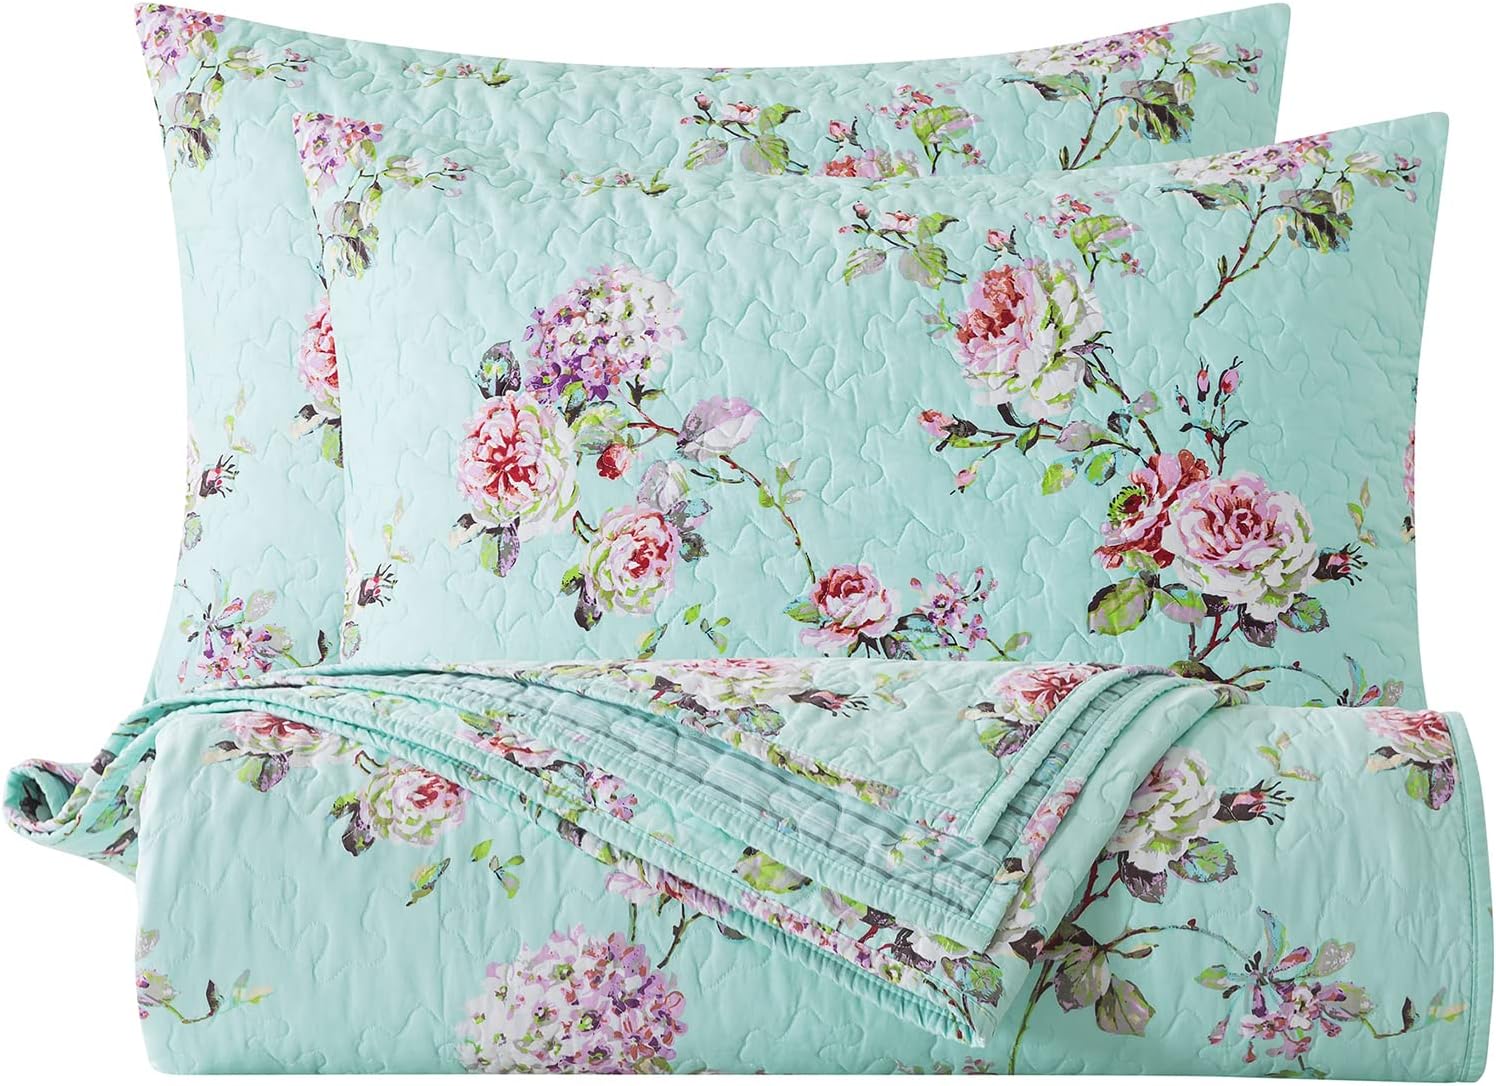 FADFAY Floral Cotton Quilt Sets King Soft Lightweight Bedspreads All-Season, 90x98'' Hydrangea Peony Pattern Reversible Shabby Bedding Greenish Blue Farmhouse Coverlet 2 with Pillowshams, 3 Pcs